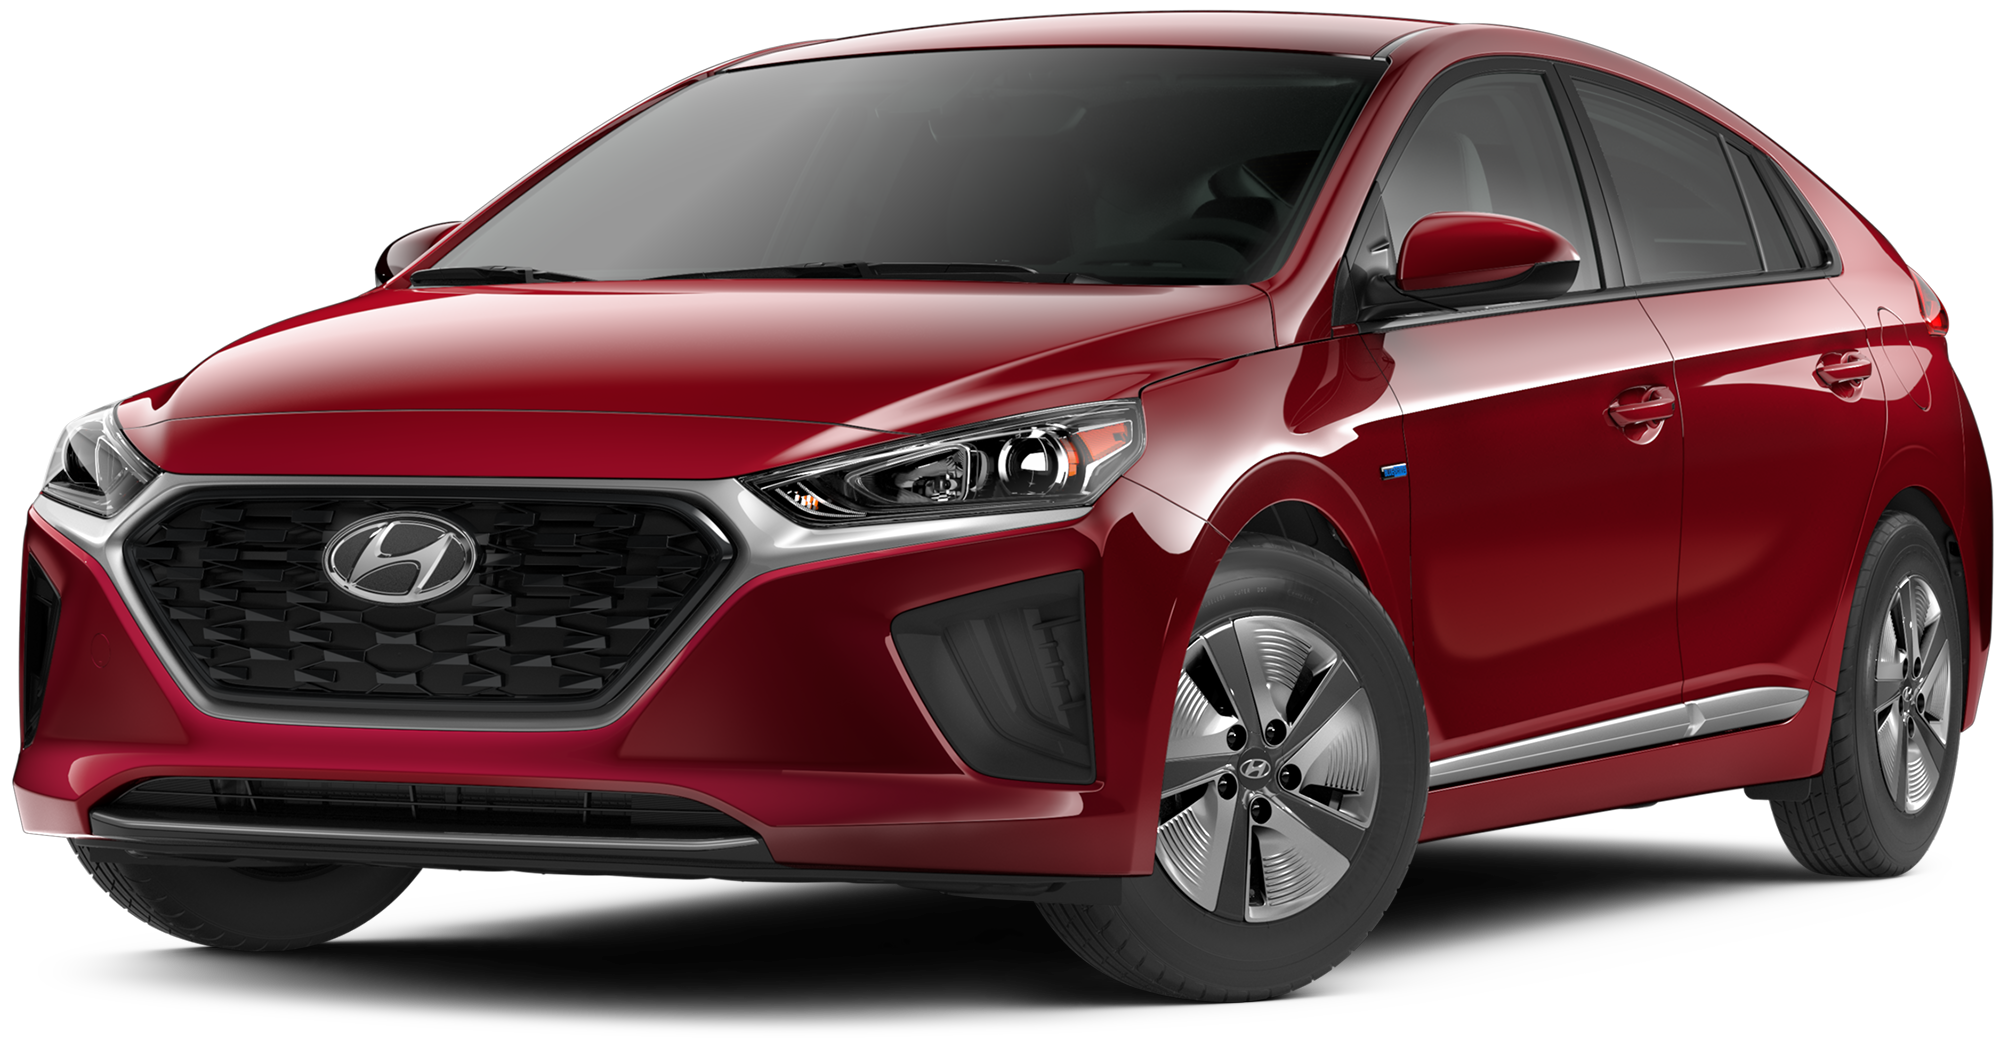 2020-hyundai-ioniq-hybrid-incentives-specials-offers-in-amherst-ns